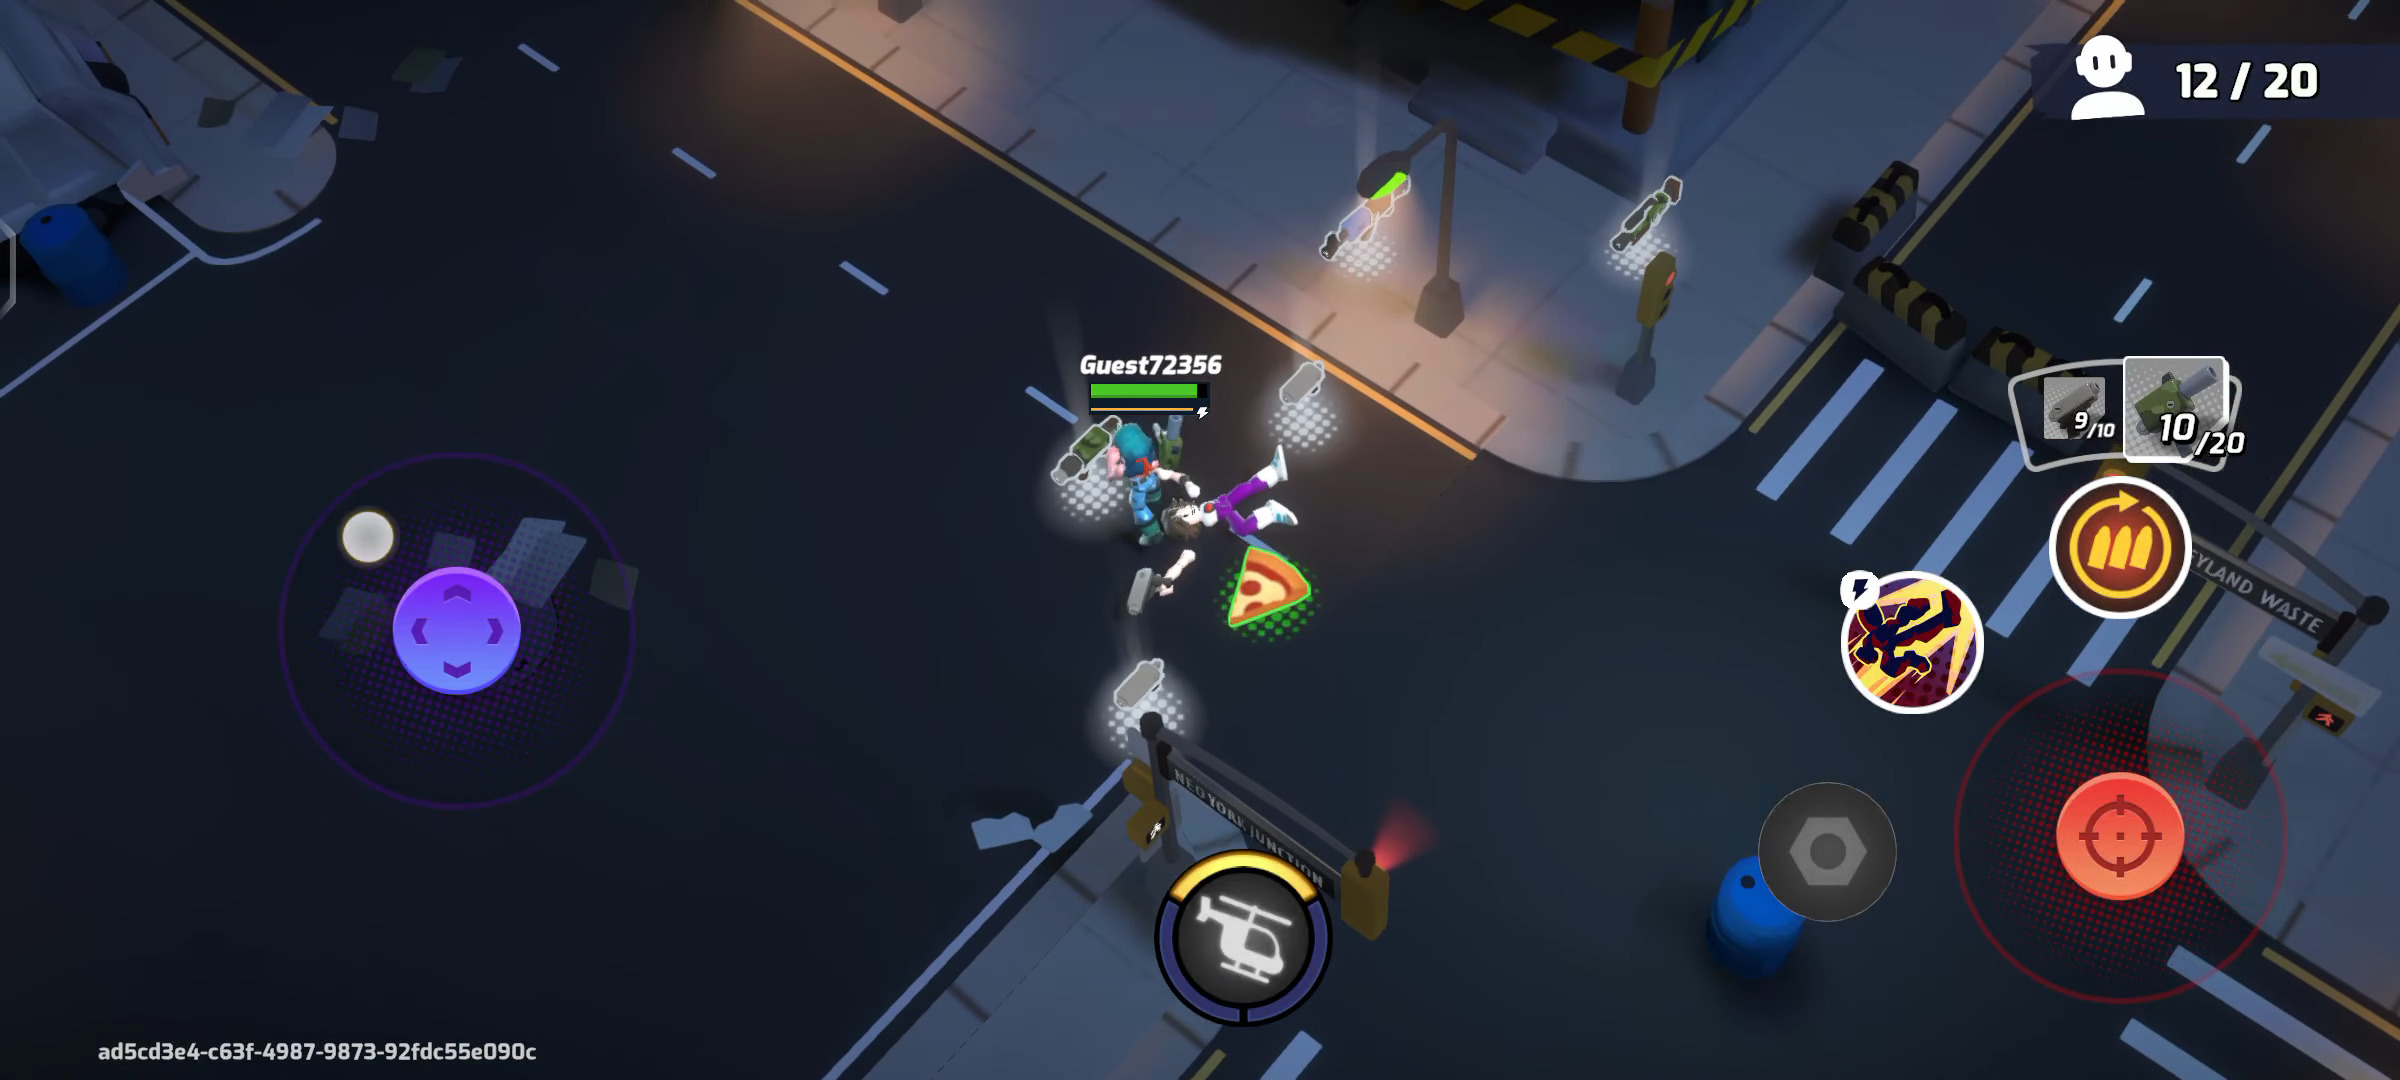 Mighty Action Heroes - Android game screenshots.